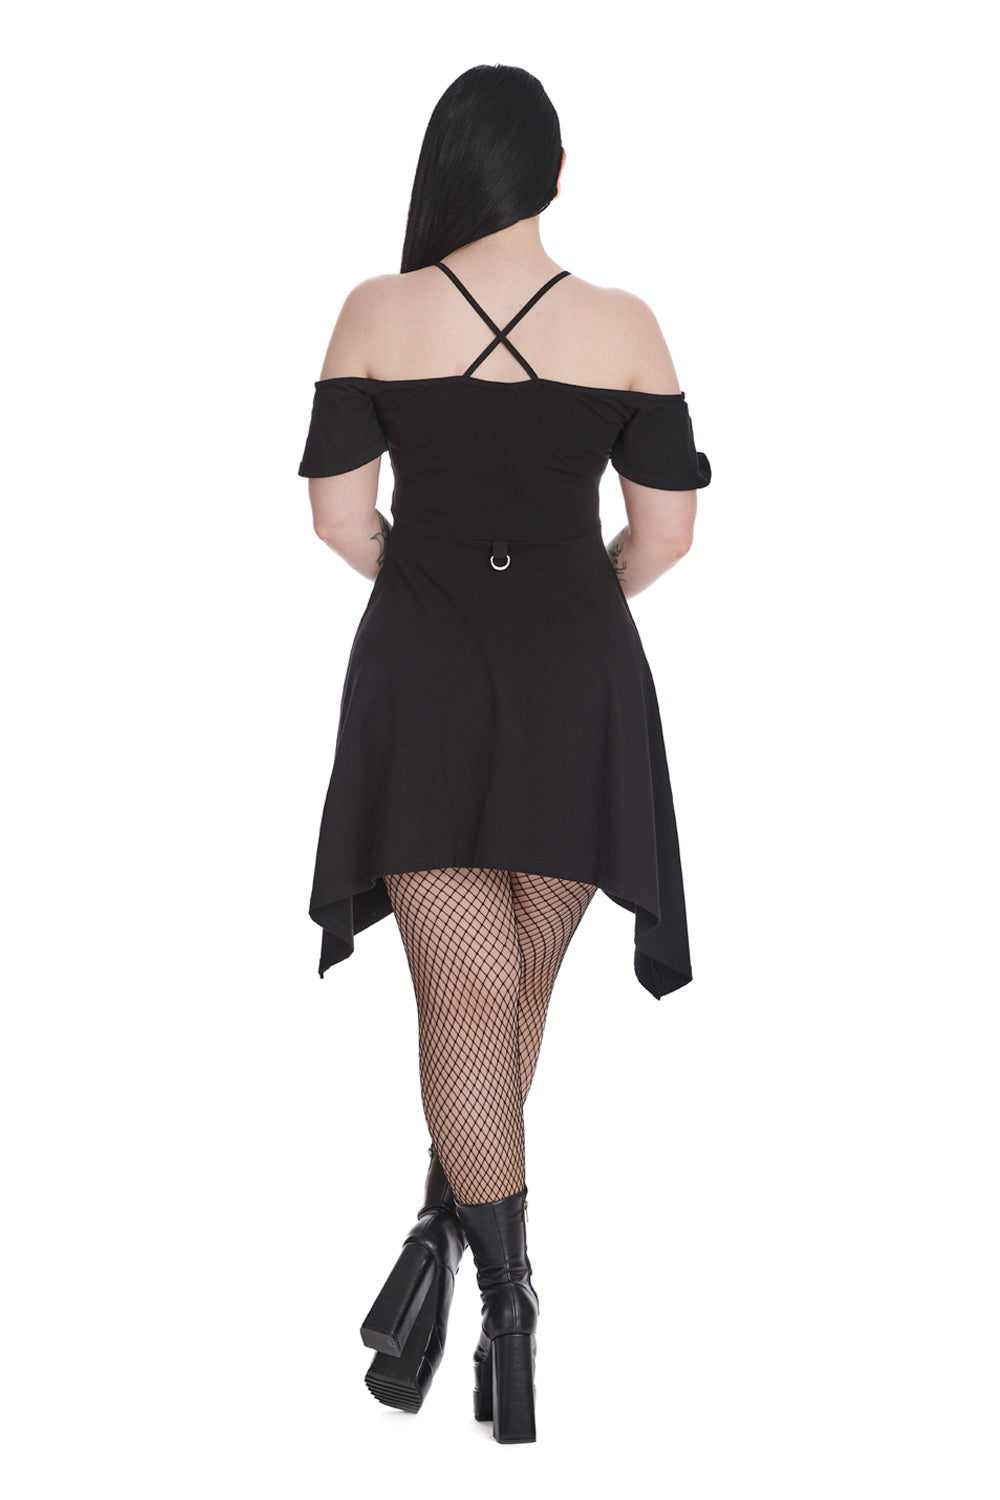 Banned Alternative WITCHING YOUR THOUGHTS OFF SHOULDER DRESS